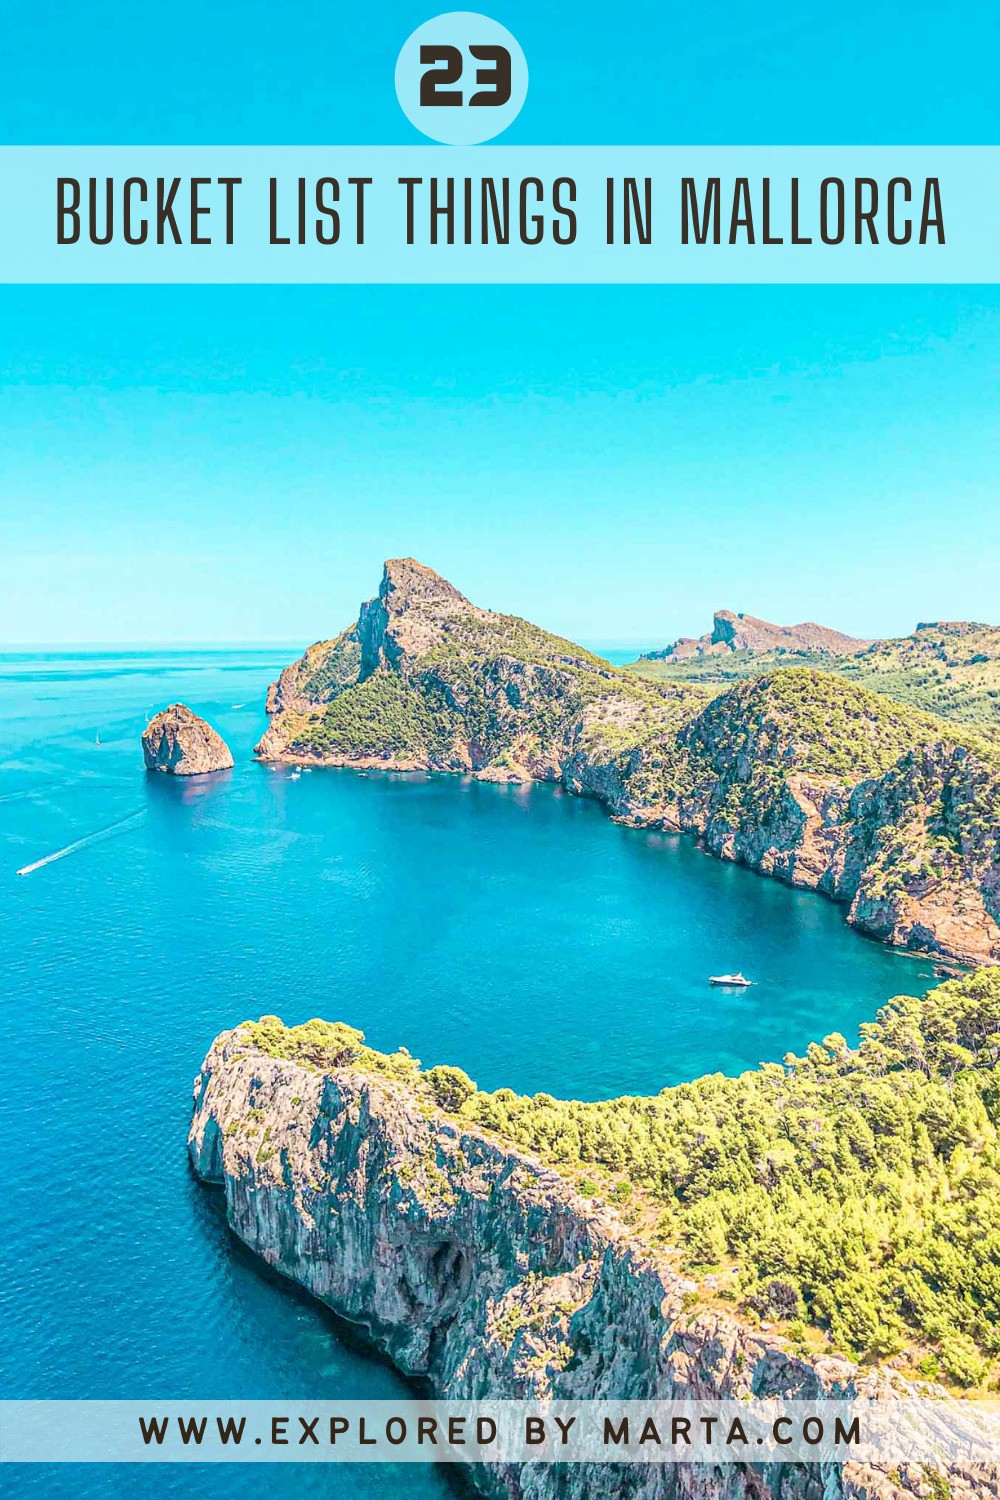 Ultimate bucket list: the best 23 things to do and see in Mallorca